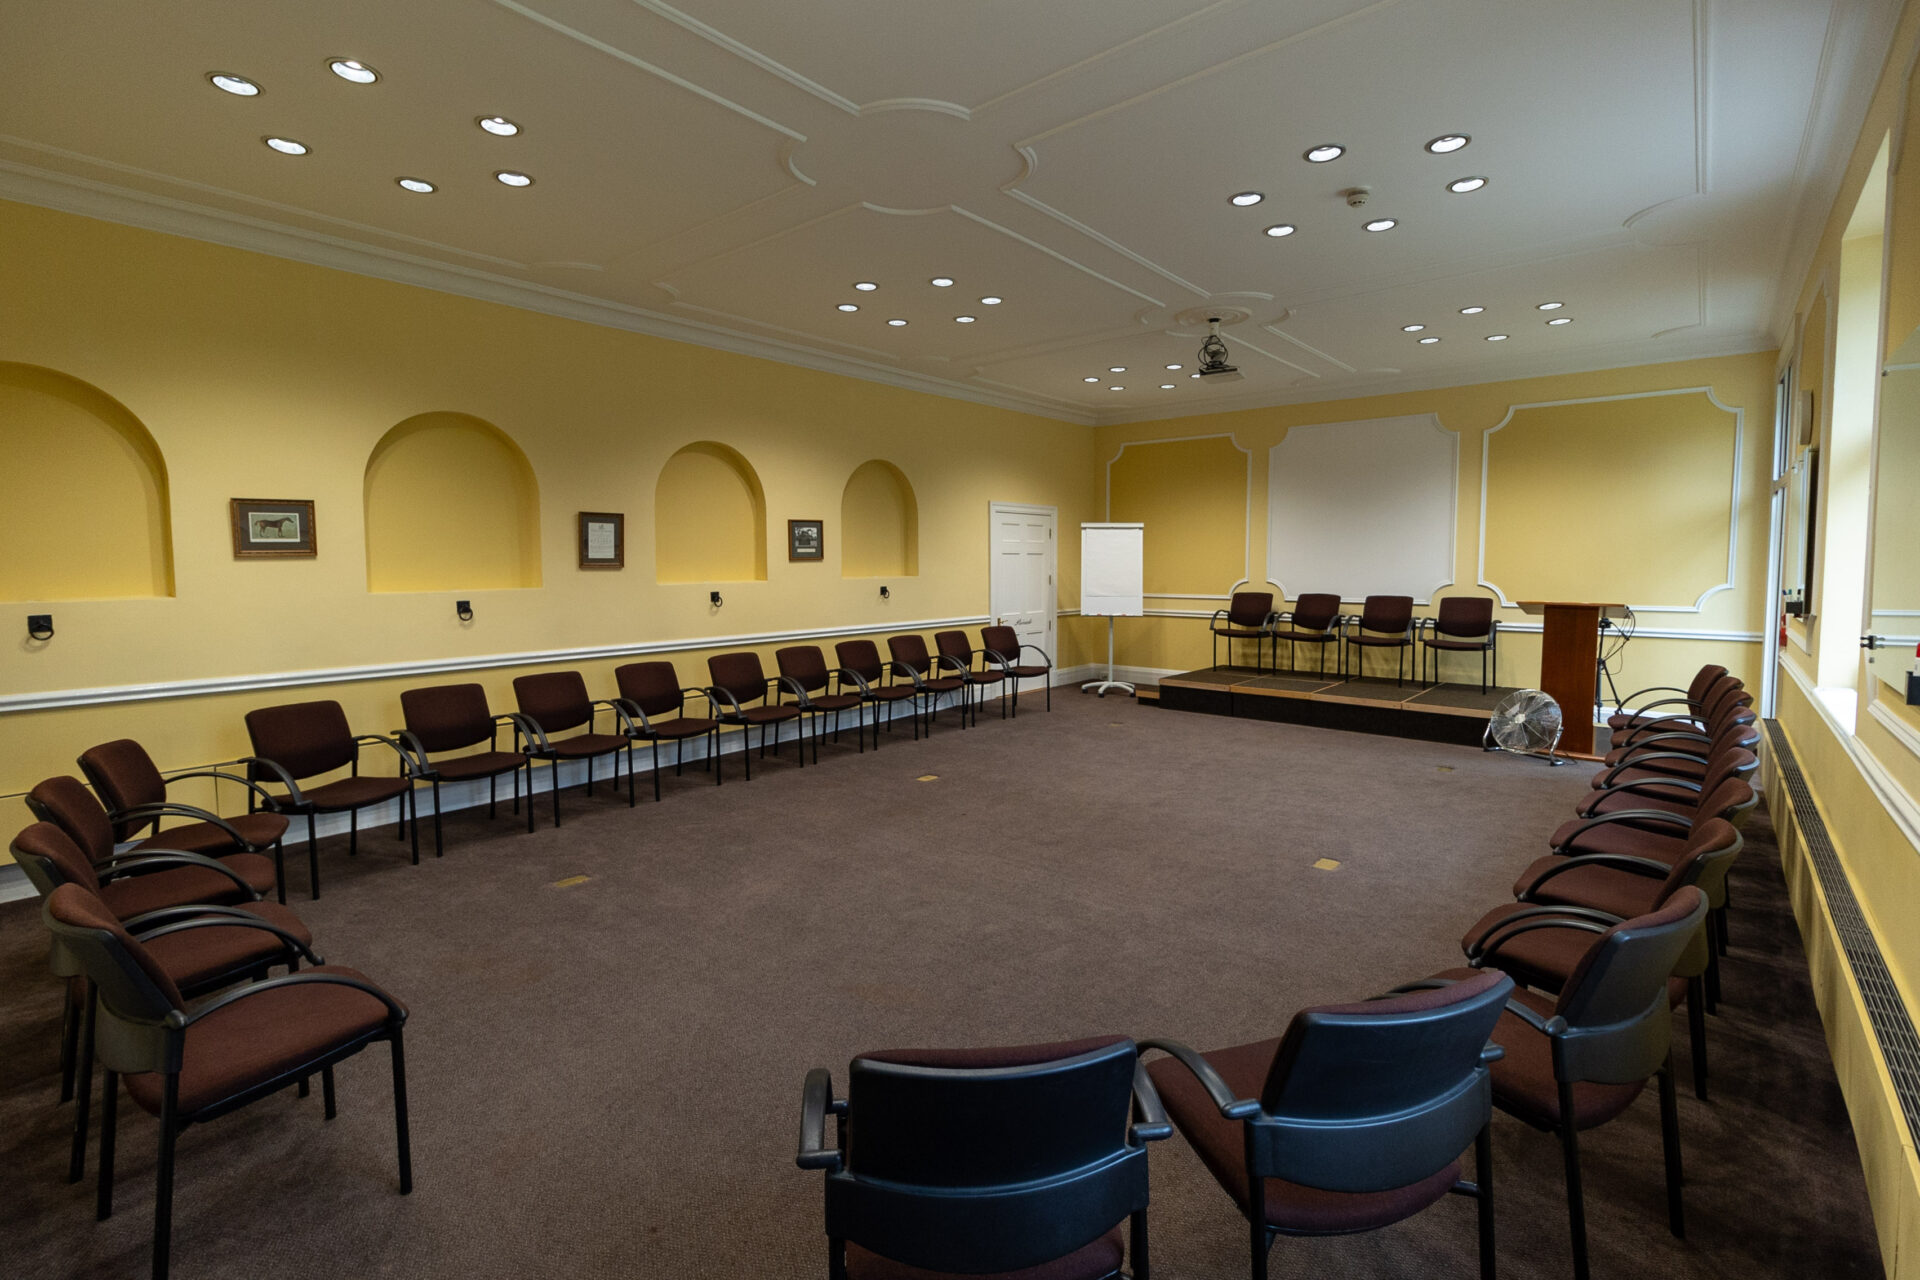 The Sandby conference room, set up in a U-shaped circle layout to accommodate up to 25 people.